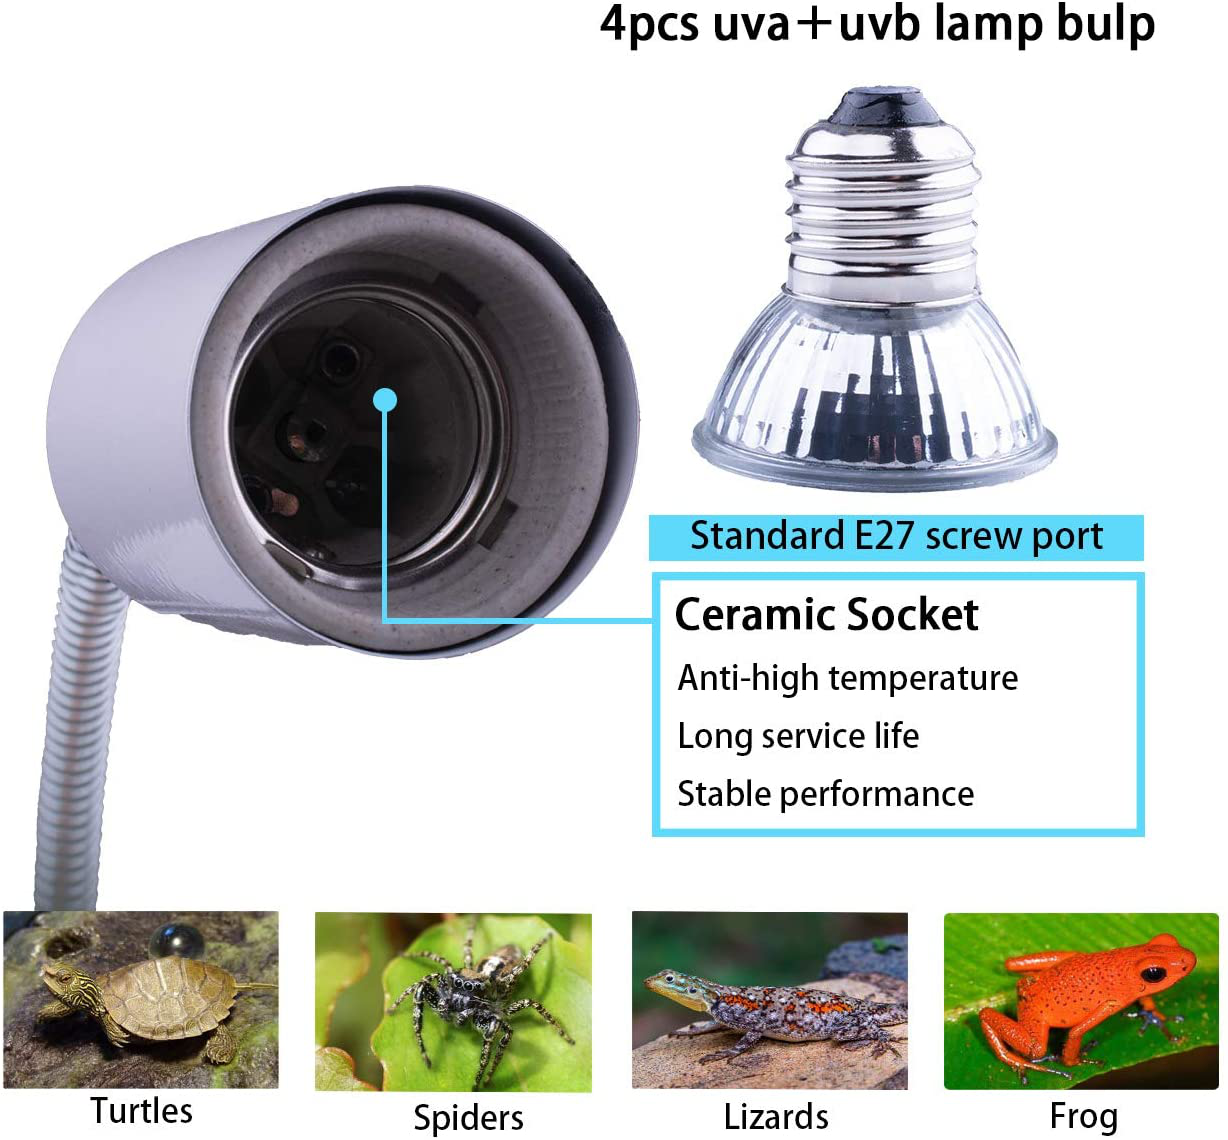 Reptile Heat Lamp, UVB Bulb, UVB Reptile Light Fixture, UVA UVB Reptile Light, Aquatic Turtle Heating Lamp, Turtle Aquarium Tank Heating Lamps Holder & Switch with 4 Heat Bulbs--White